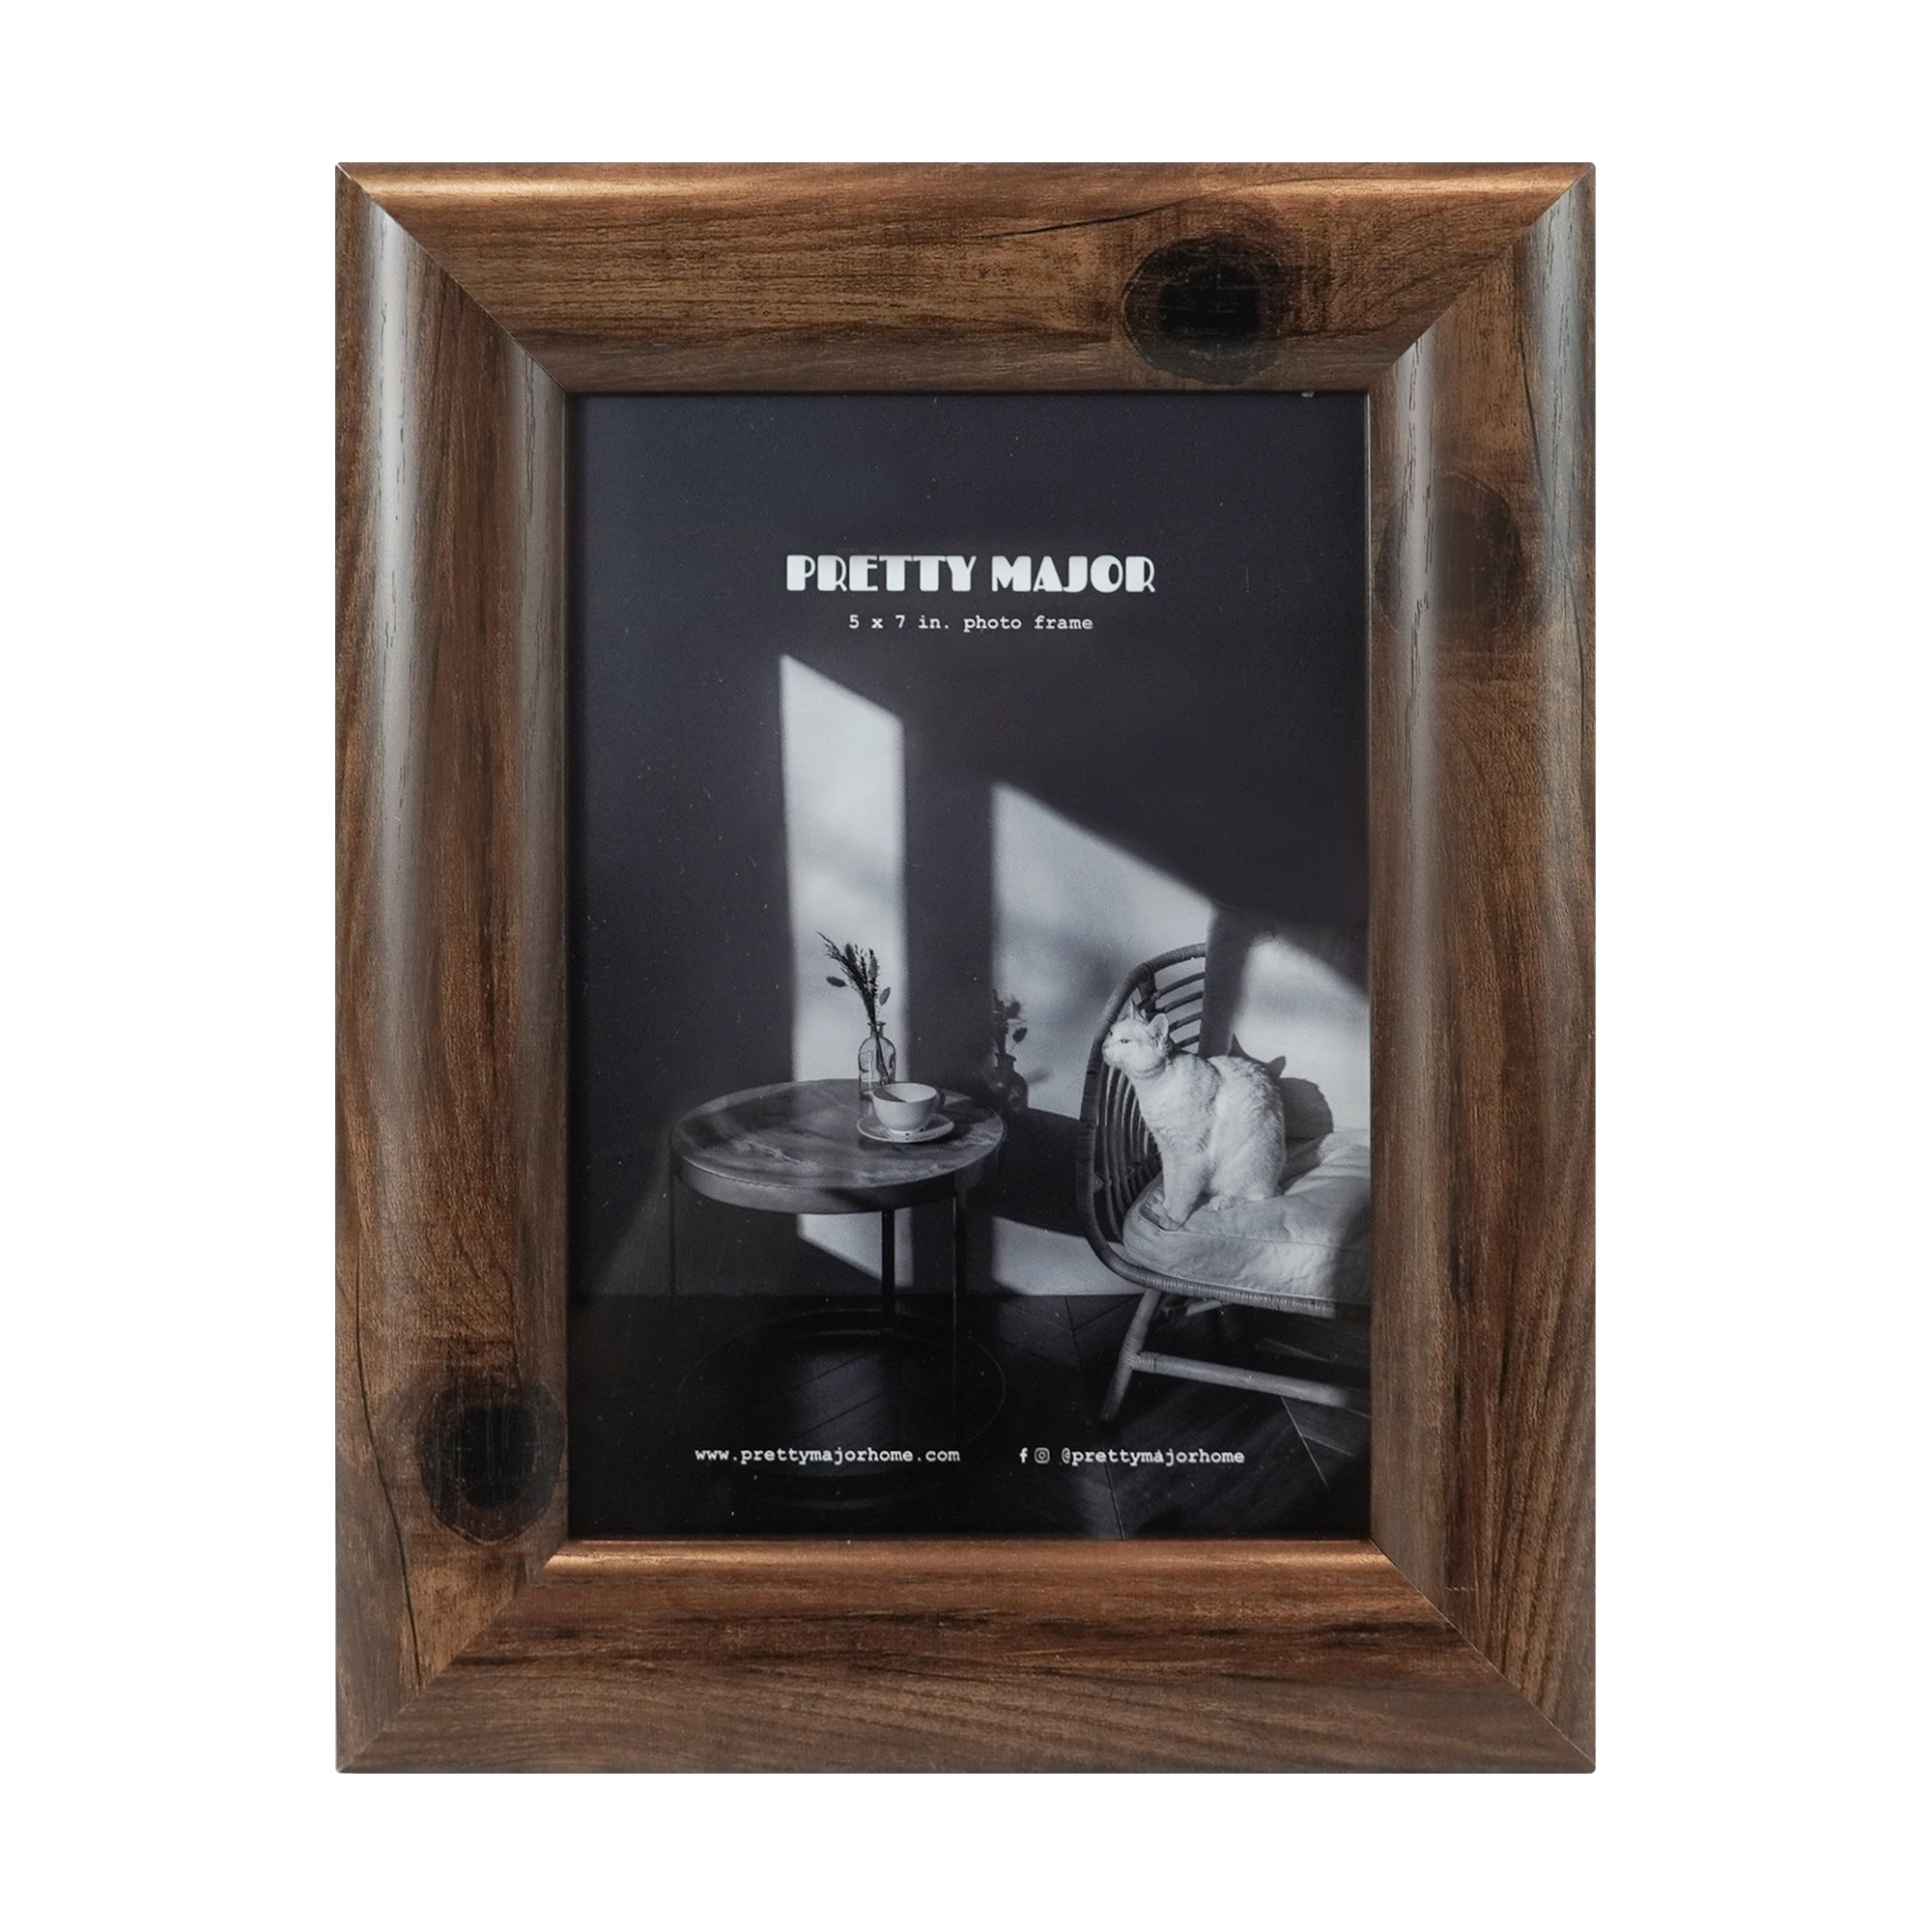 Walnut wood picture frame 5r photo size